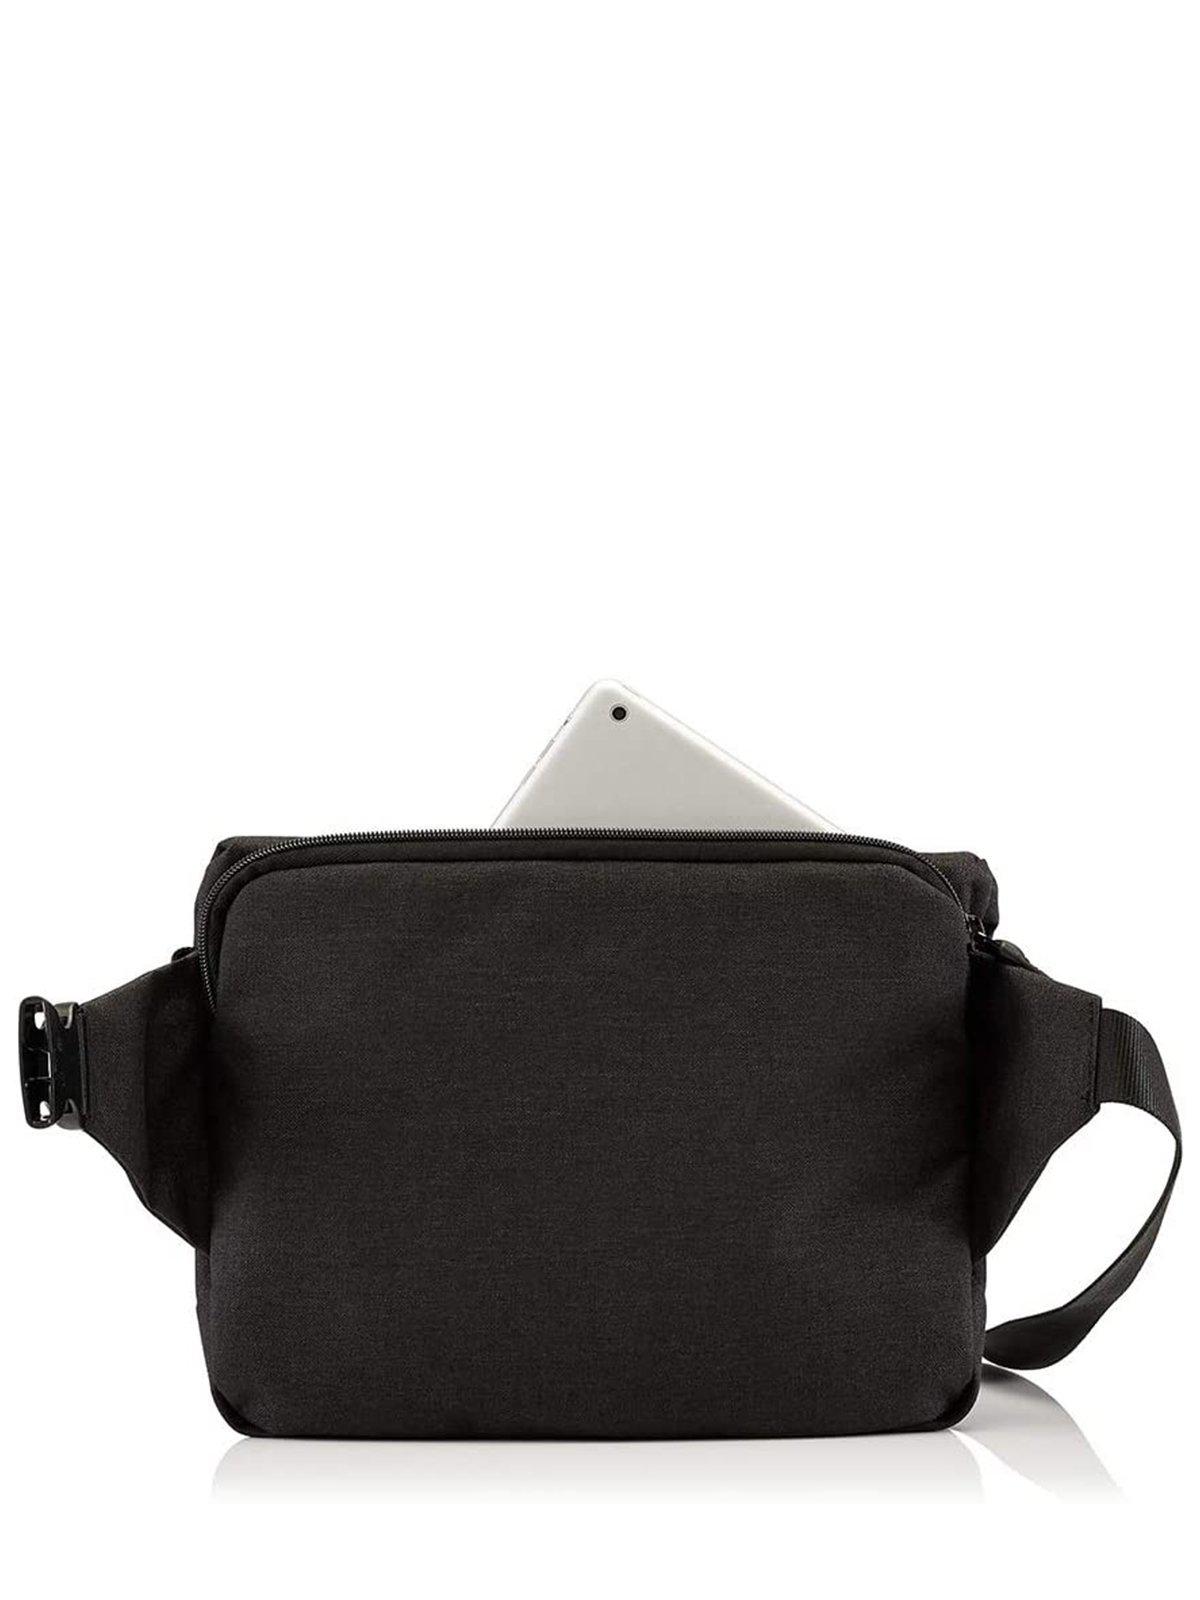 Crumpler Mini Rocket Roll Top Messenger Black Marble - MORE by Morello Indonesia